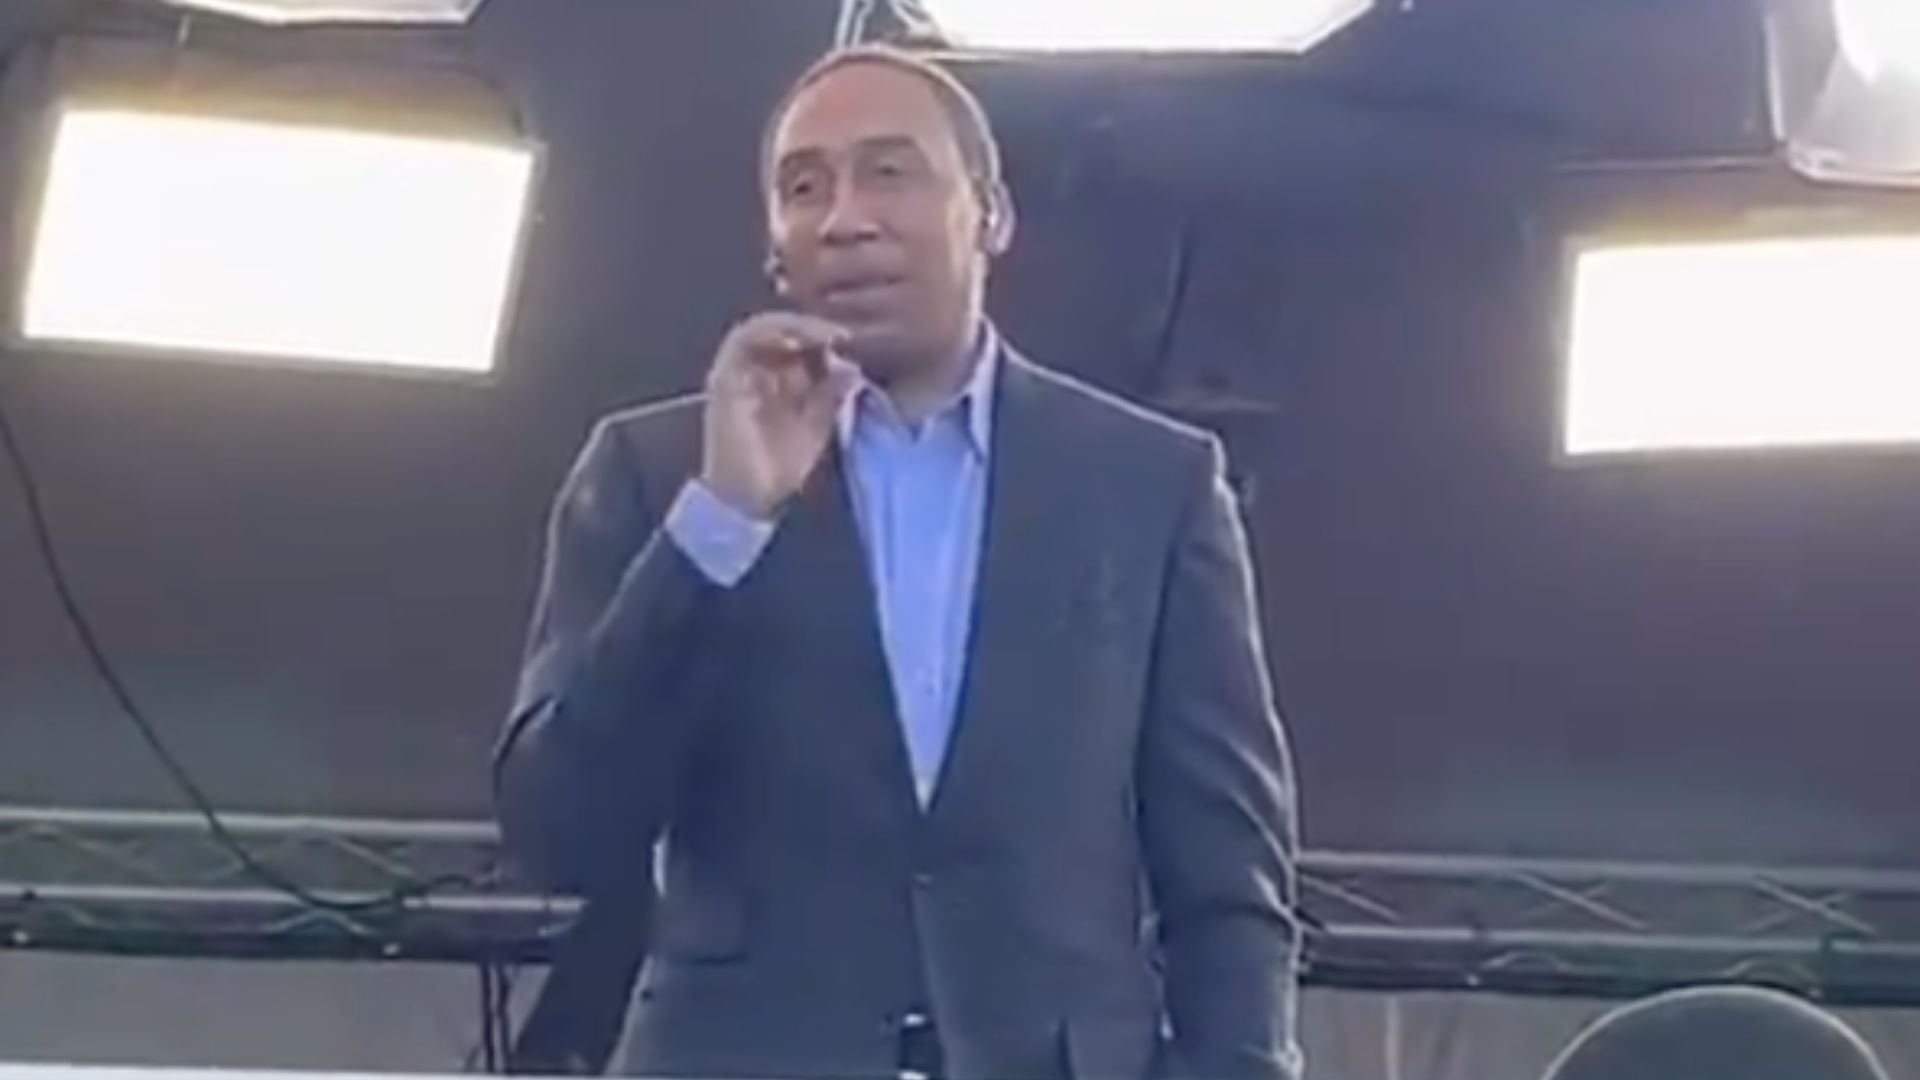 WATCH: ‘First Take’ Fans Erupt After Stephen A. Smith Jokes About Smoking ‘Some Weed’